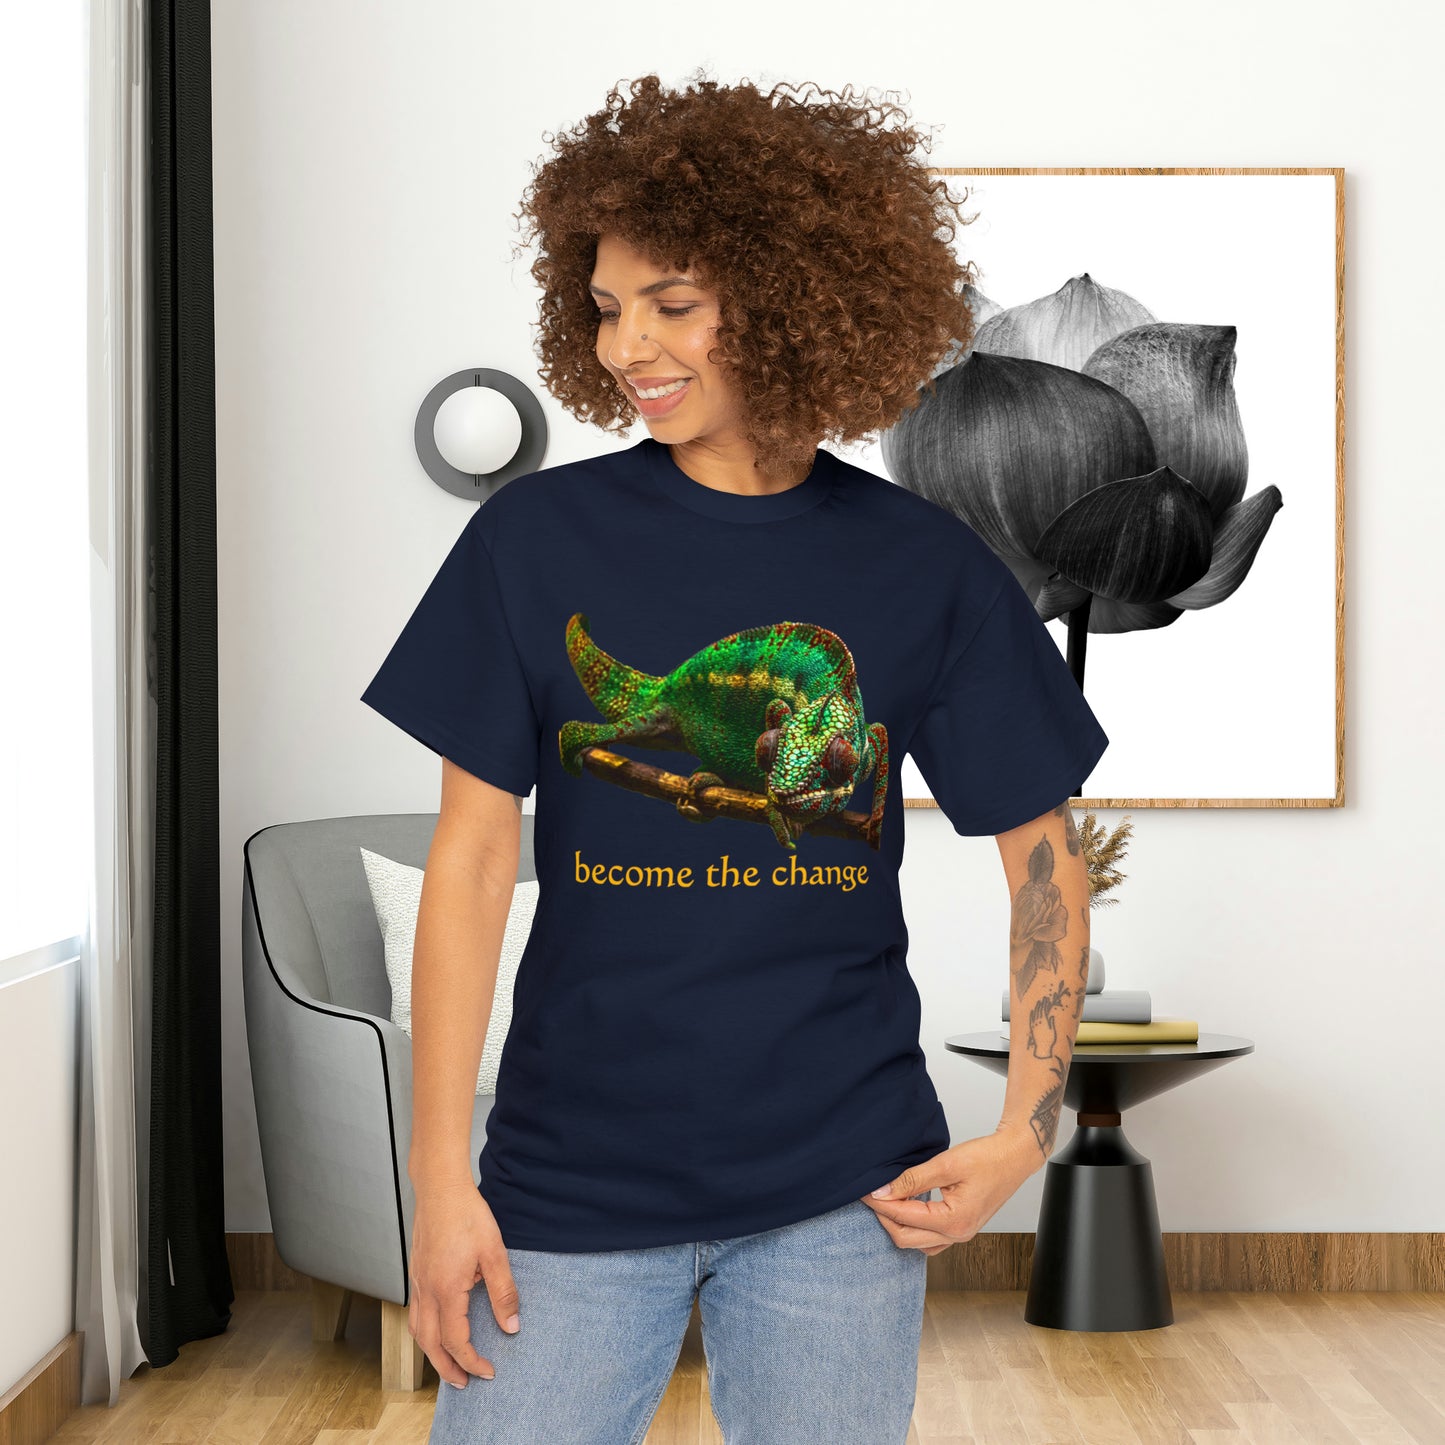 Want change? Don’t wait! “become the change" Unisex Heavy Cotton Tee makes for a great gift or get one to enjoy yourself. Change can be very good indeed!